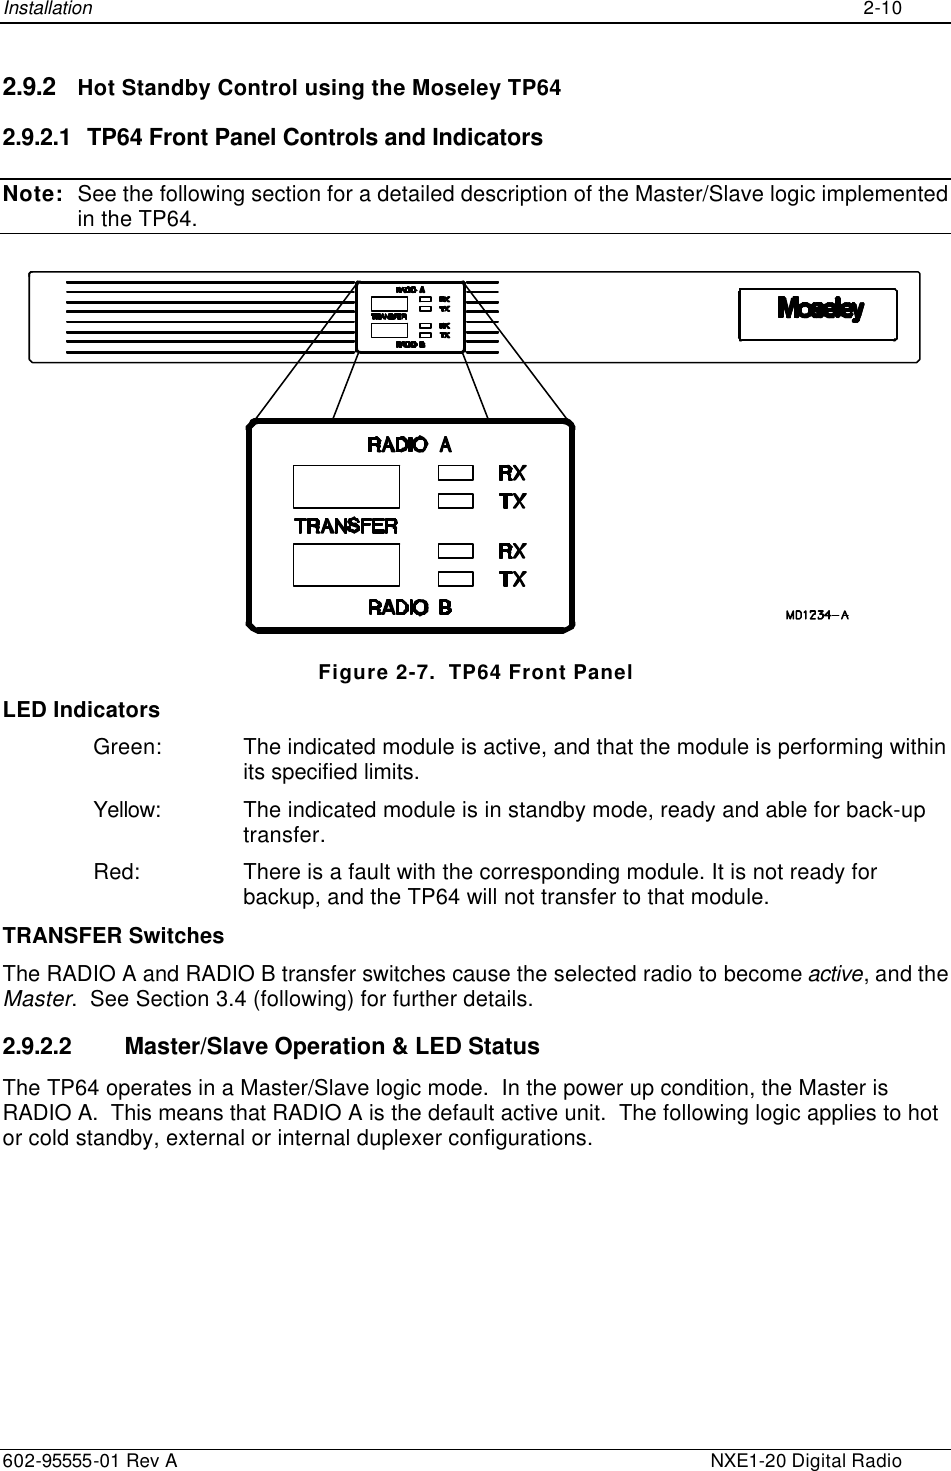 Installation    2-10  602-95555-01 Rev A    NXE1-20 Digital Radio 2.9.2 Hot Standby Control using the Moseley TP64 2.9.2.1 TP64 Front Panel Controls and Indicators Note: See the following section for a detailed description of the Master/Slave logic implemented in the TP64.  Figure 2-7.  TP64 Front Panel LED Indicators Green: The indicated module is active, and that the module is performing within its specified limits. Yellow: The indicated module is in standby mode, ready and able for back-up transfer. Red: There is a fault with the corresponding module. It is not ready for backup, and the TP64 will not transfer to that module. TRANSFER Switches The RADIO A and RADIO B transfer switches cause the selected radio to become active, and the Master.  See Section 3.4 (following) for further details. 2.9.2.2 Master/Slave Operation &amp; LED Status The TP64 operates in a Master/Slave logic mode.  In the power up condition, the Master is RADIO A.  This means that RADIO A is the default active unit.  The following logic applies to hot or cold standby, external or internal duplexer configurations. 